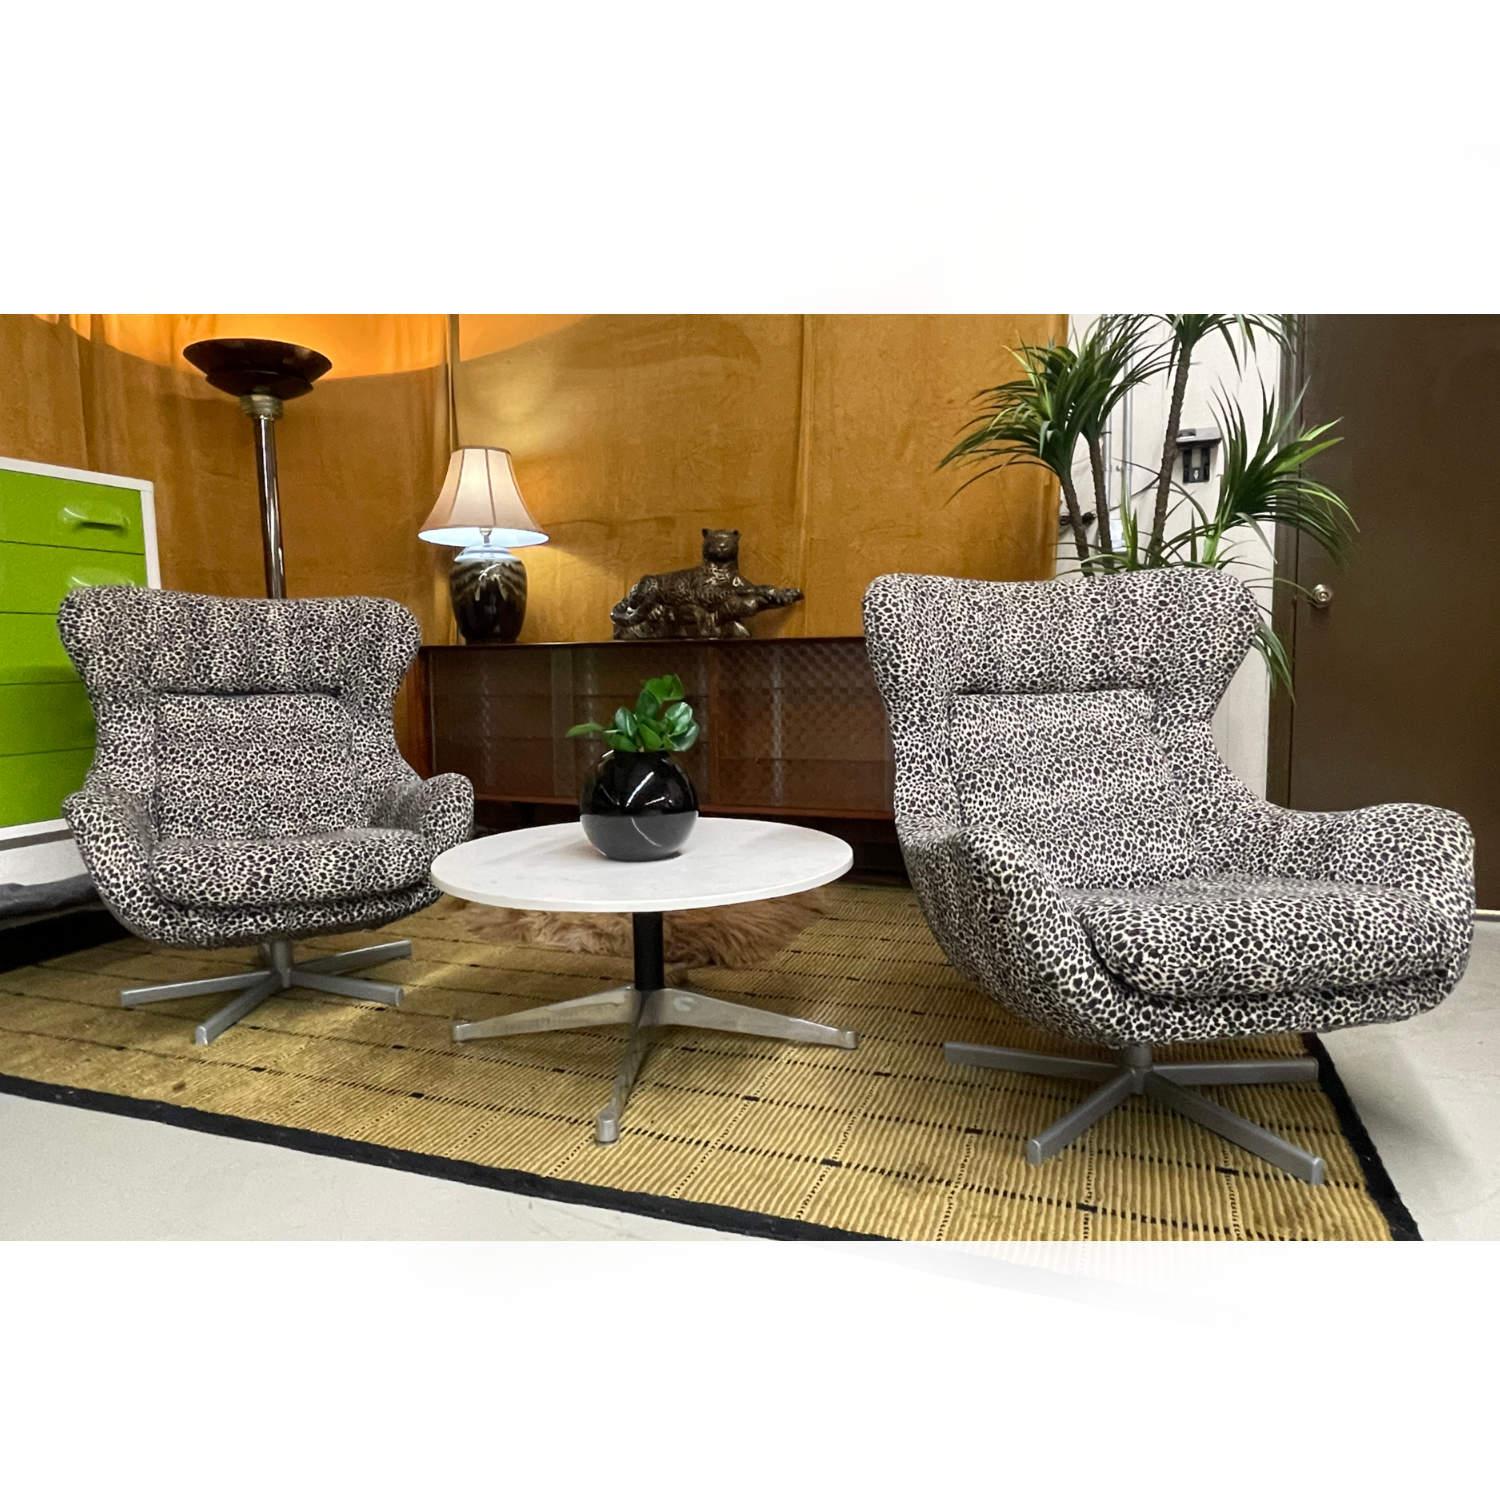 Pair of super sexy lounge chair in plush, fuzzy leopard print wool material. Recently reupholstered with tons of life on the fabric. The ultra modern chair is in the style the iconic Arne Jacobsen world recognized, timeless design Egg Chair. 5-star